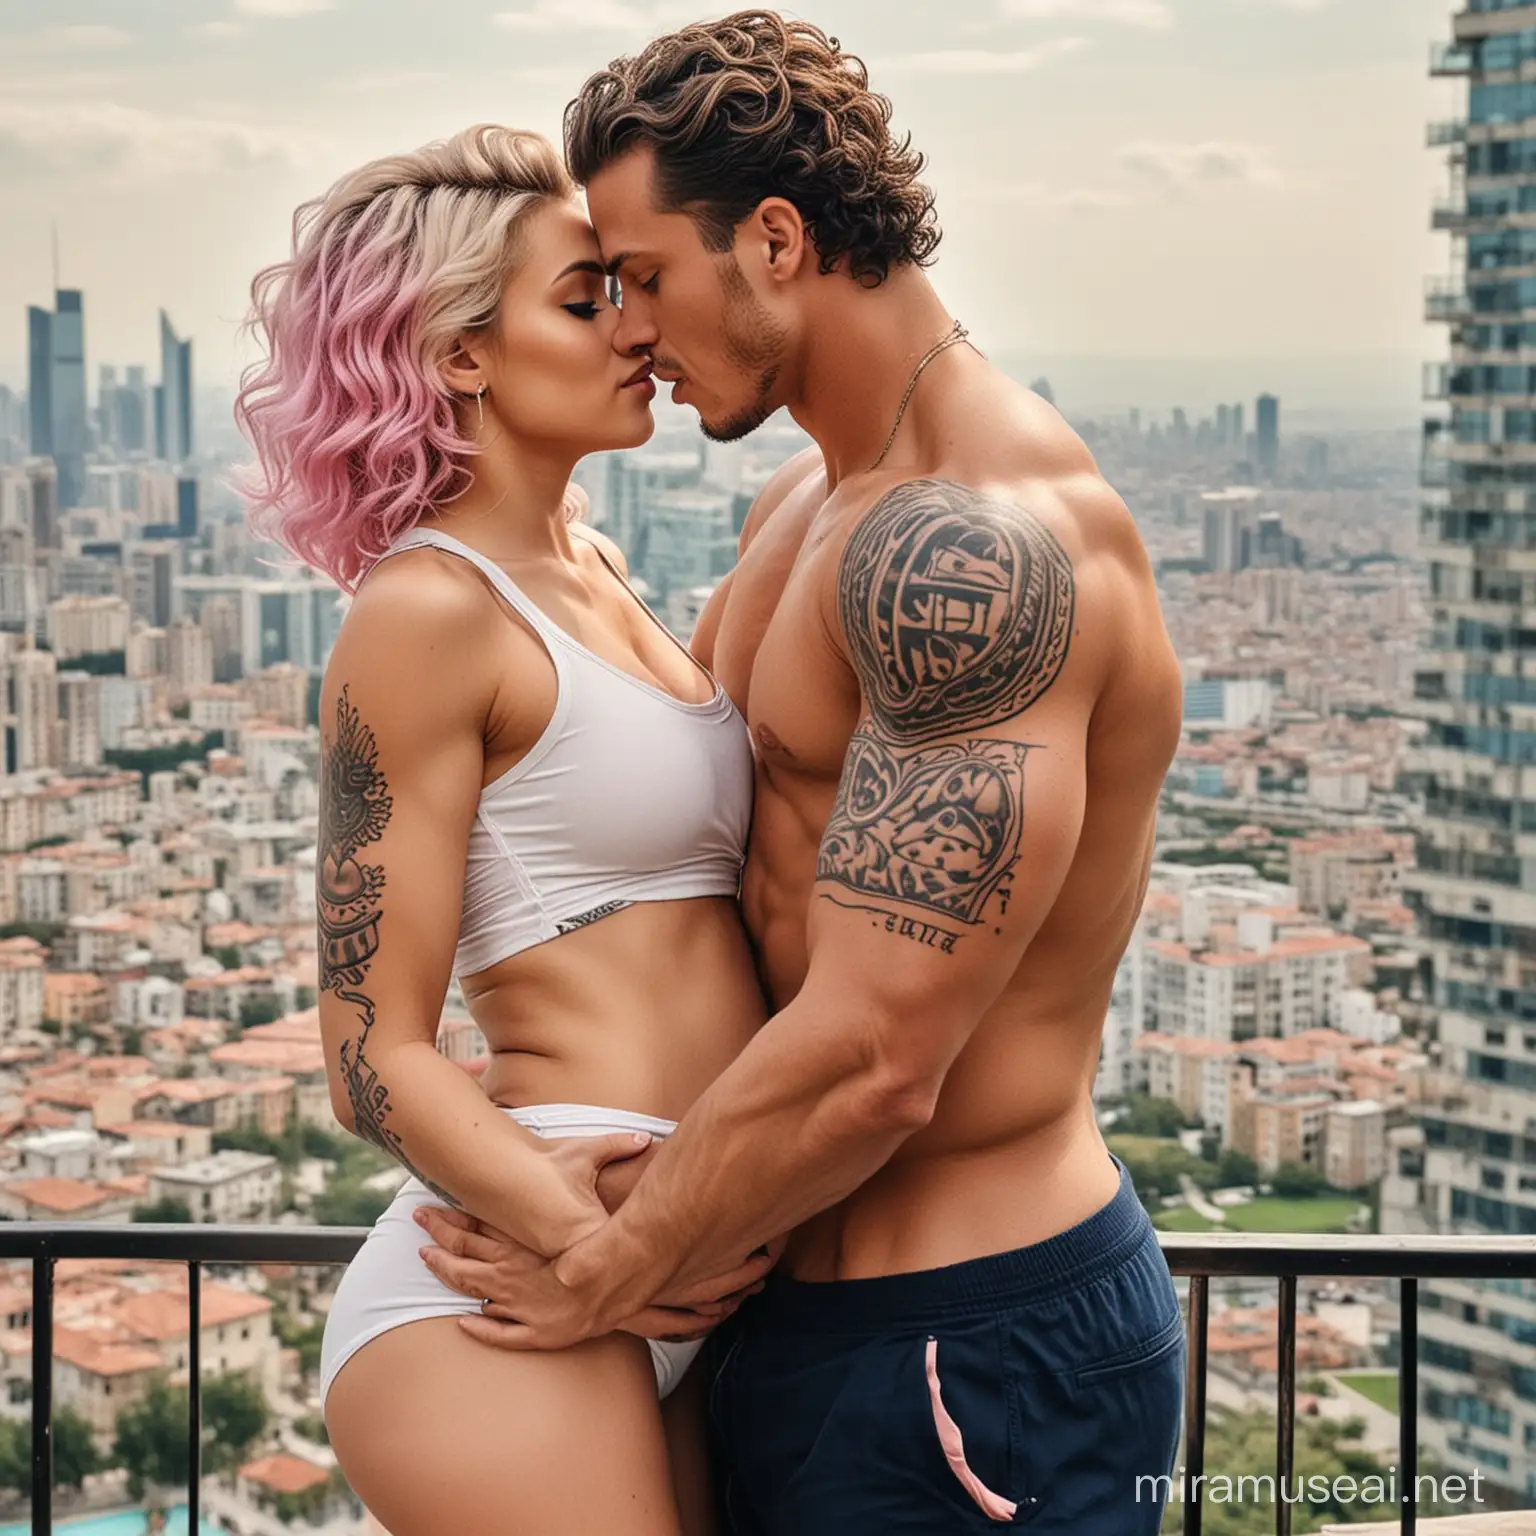 Talented Soccer Player and Royal Wife Embrace in Luxurious Villa with Cityscape View